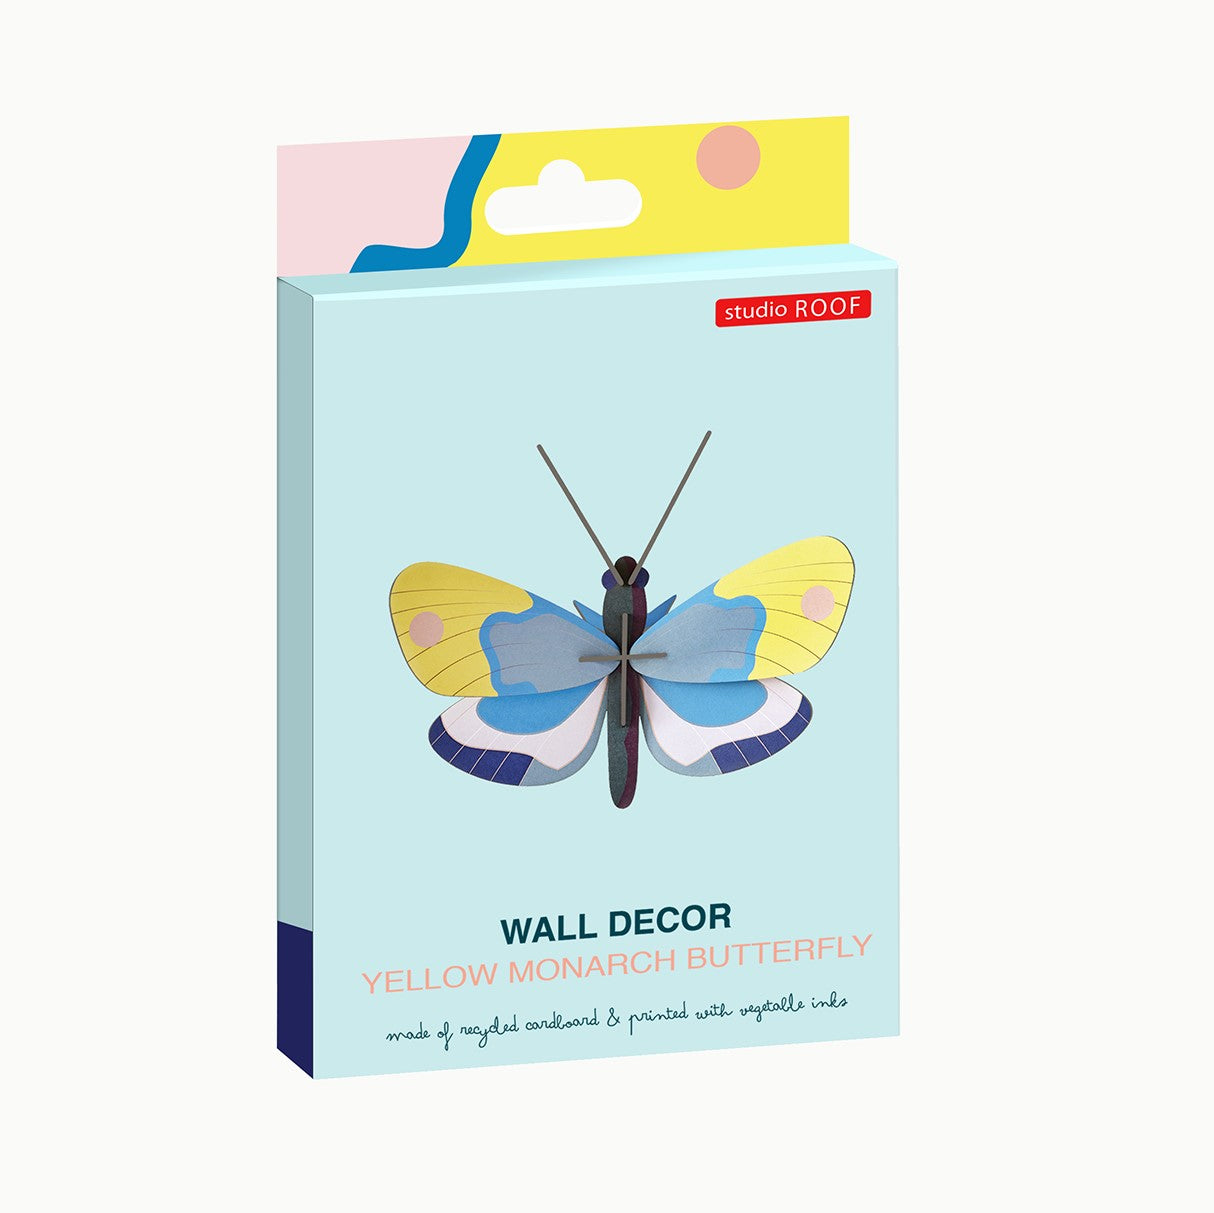 Studio Roof Yellow Monarch Butterfly Packaging